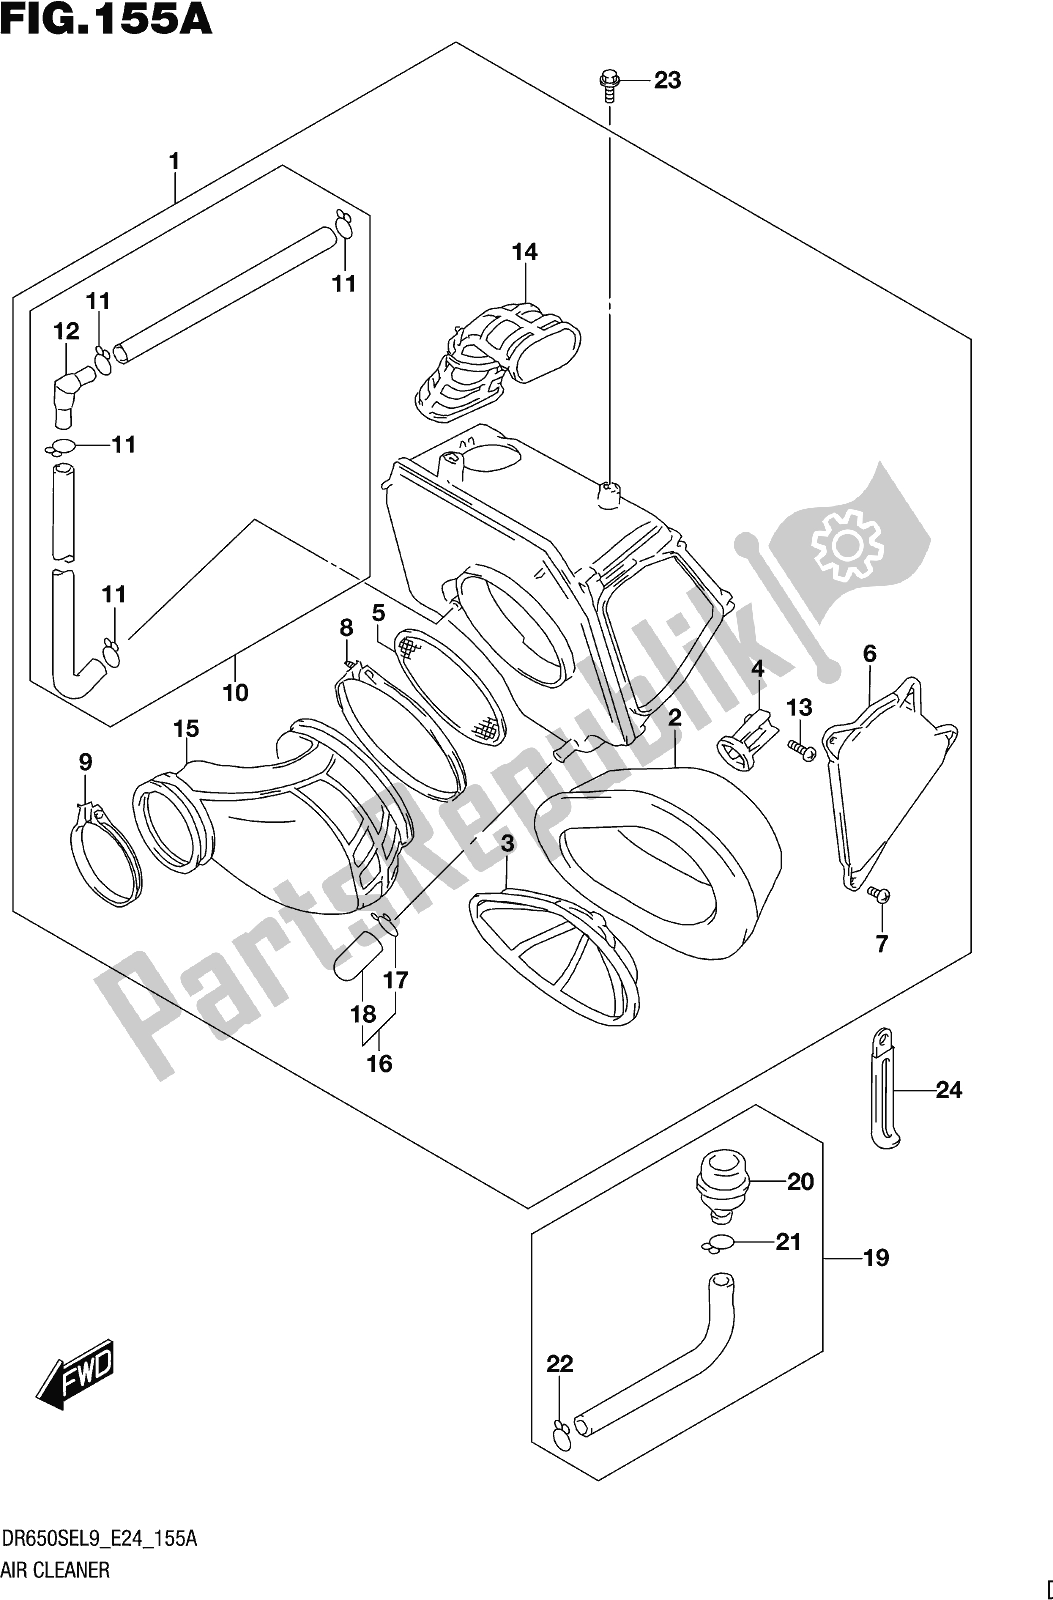 All parts for the Fig. 155a Air Cleaner of the Suzuki DR 650 SE 2019